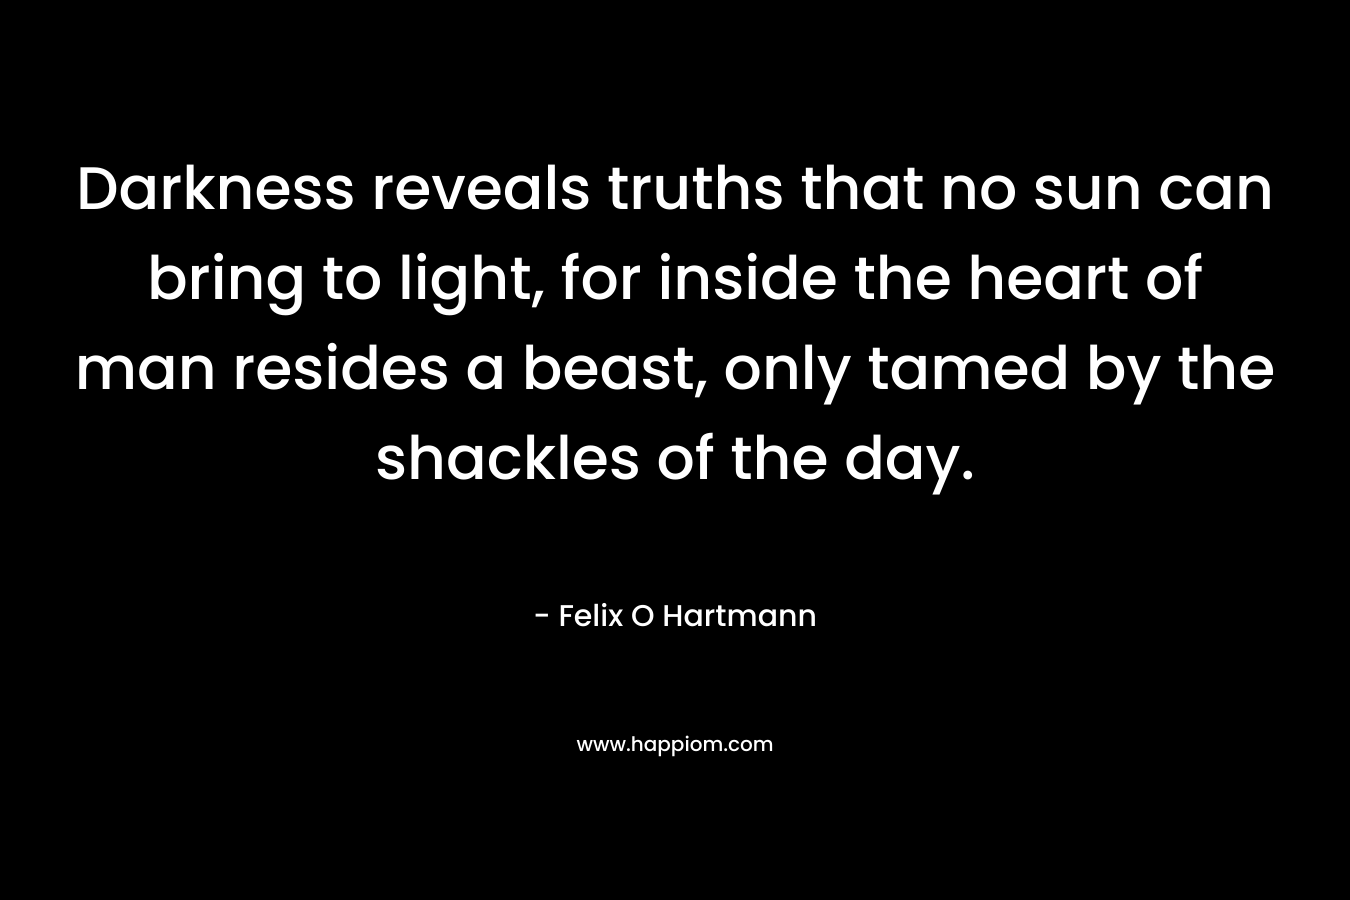 Darkness reveals truths that no sun can bring to light, for inside the heart of man resides a beast, only tamed by the shackles of the day. – Felix O Hartmann